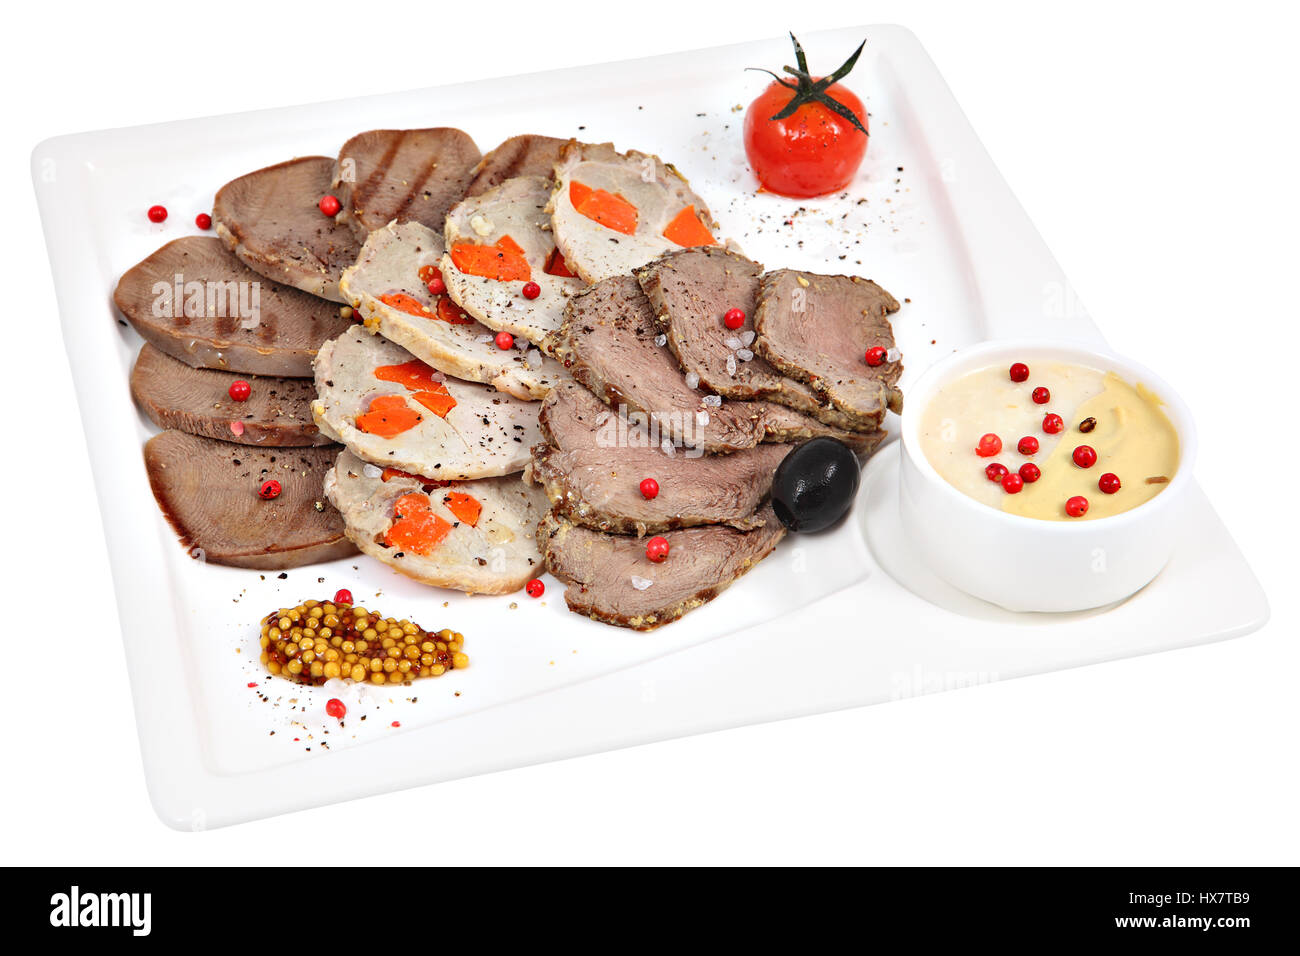 Meat assortment on a square white plate, isolated studio shot. Stock Photo